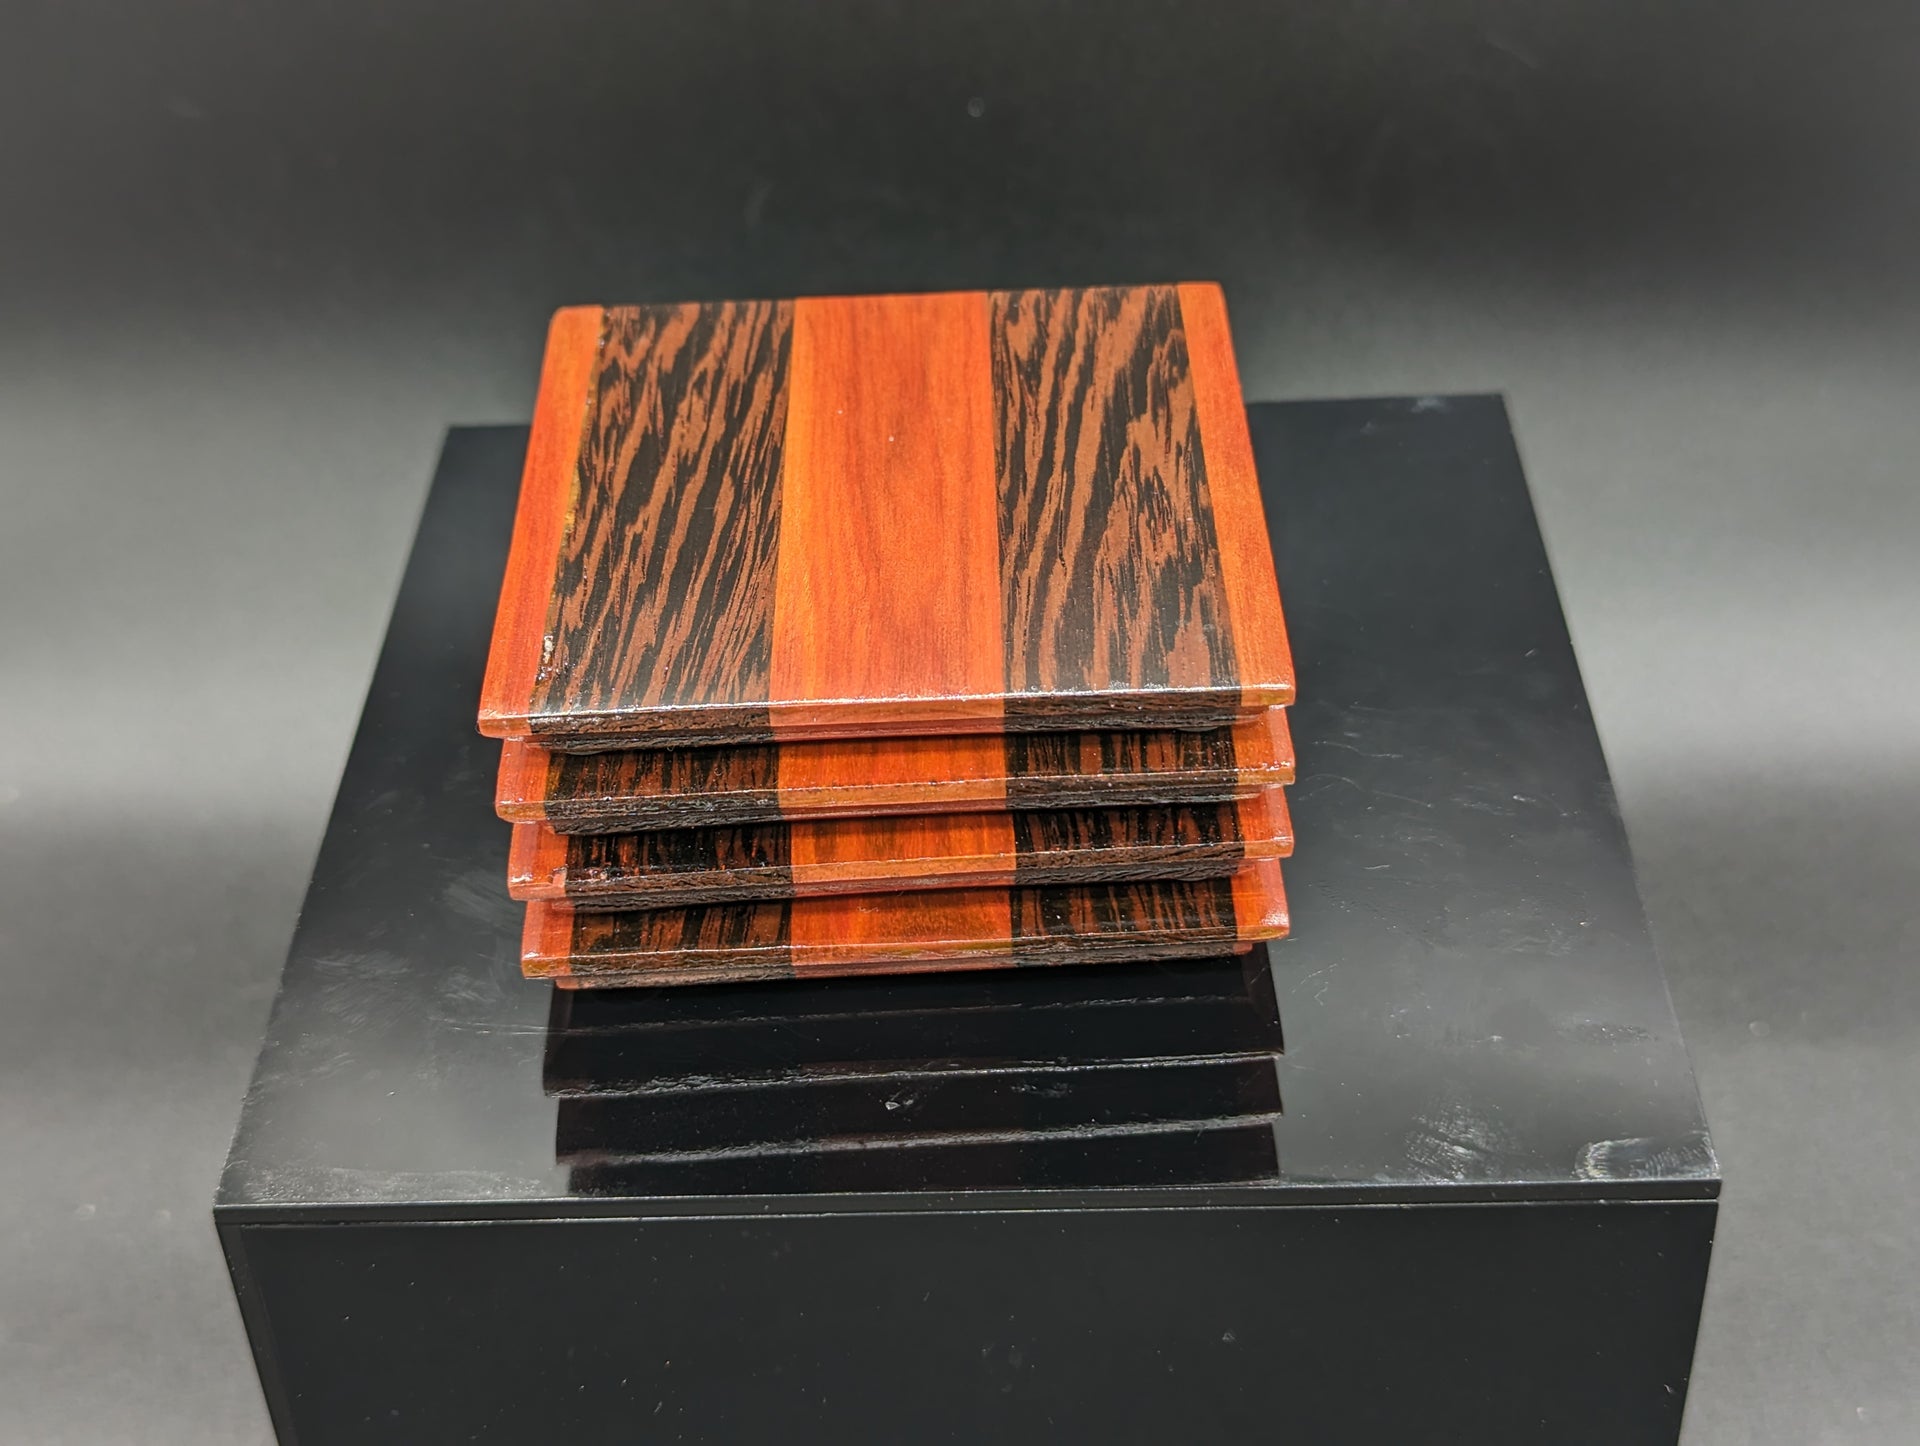 Coasters - Wooden - Made From Walnut, Maple And Exotic African